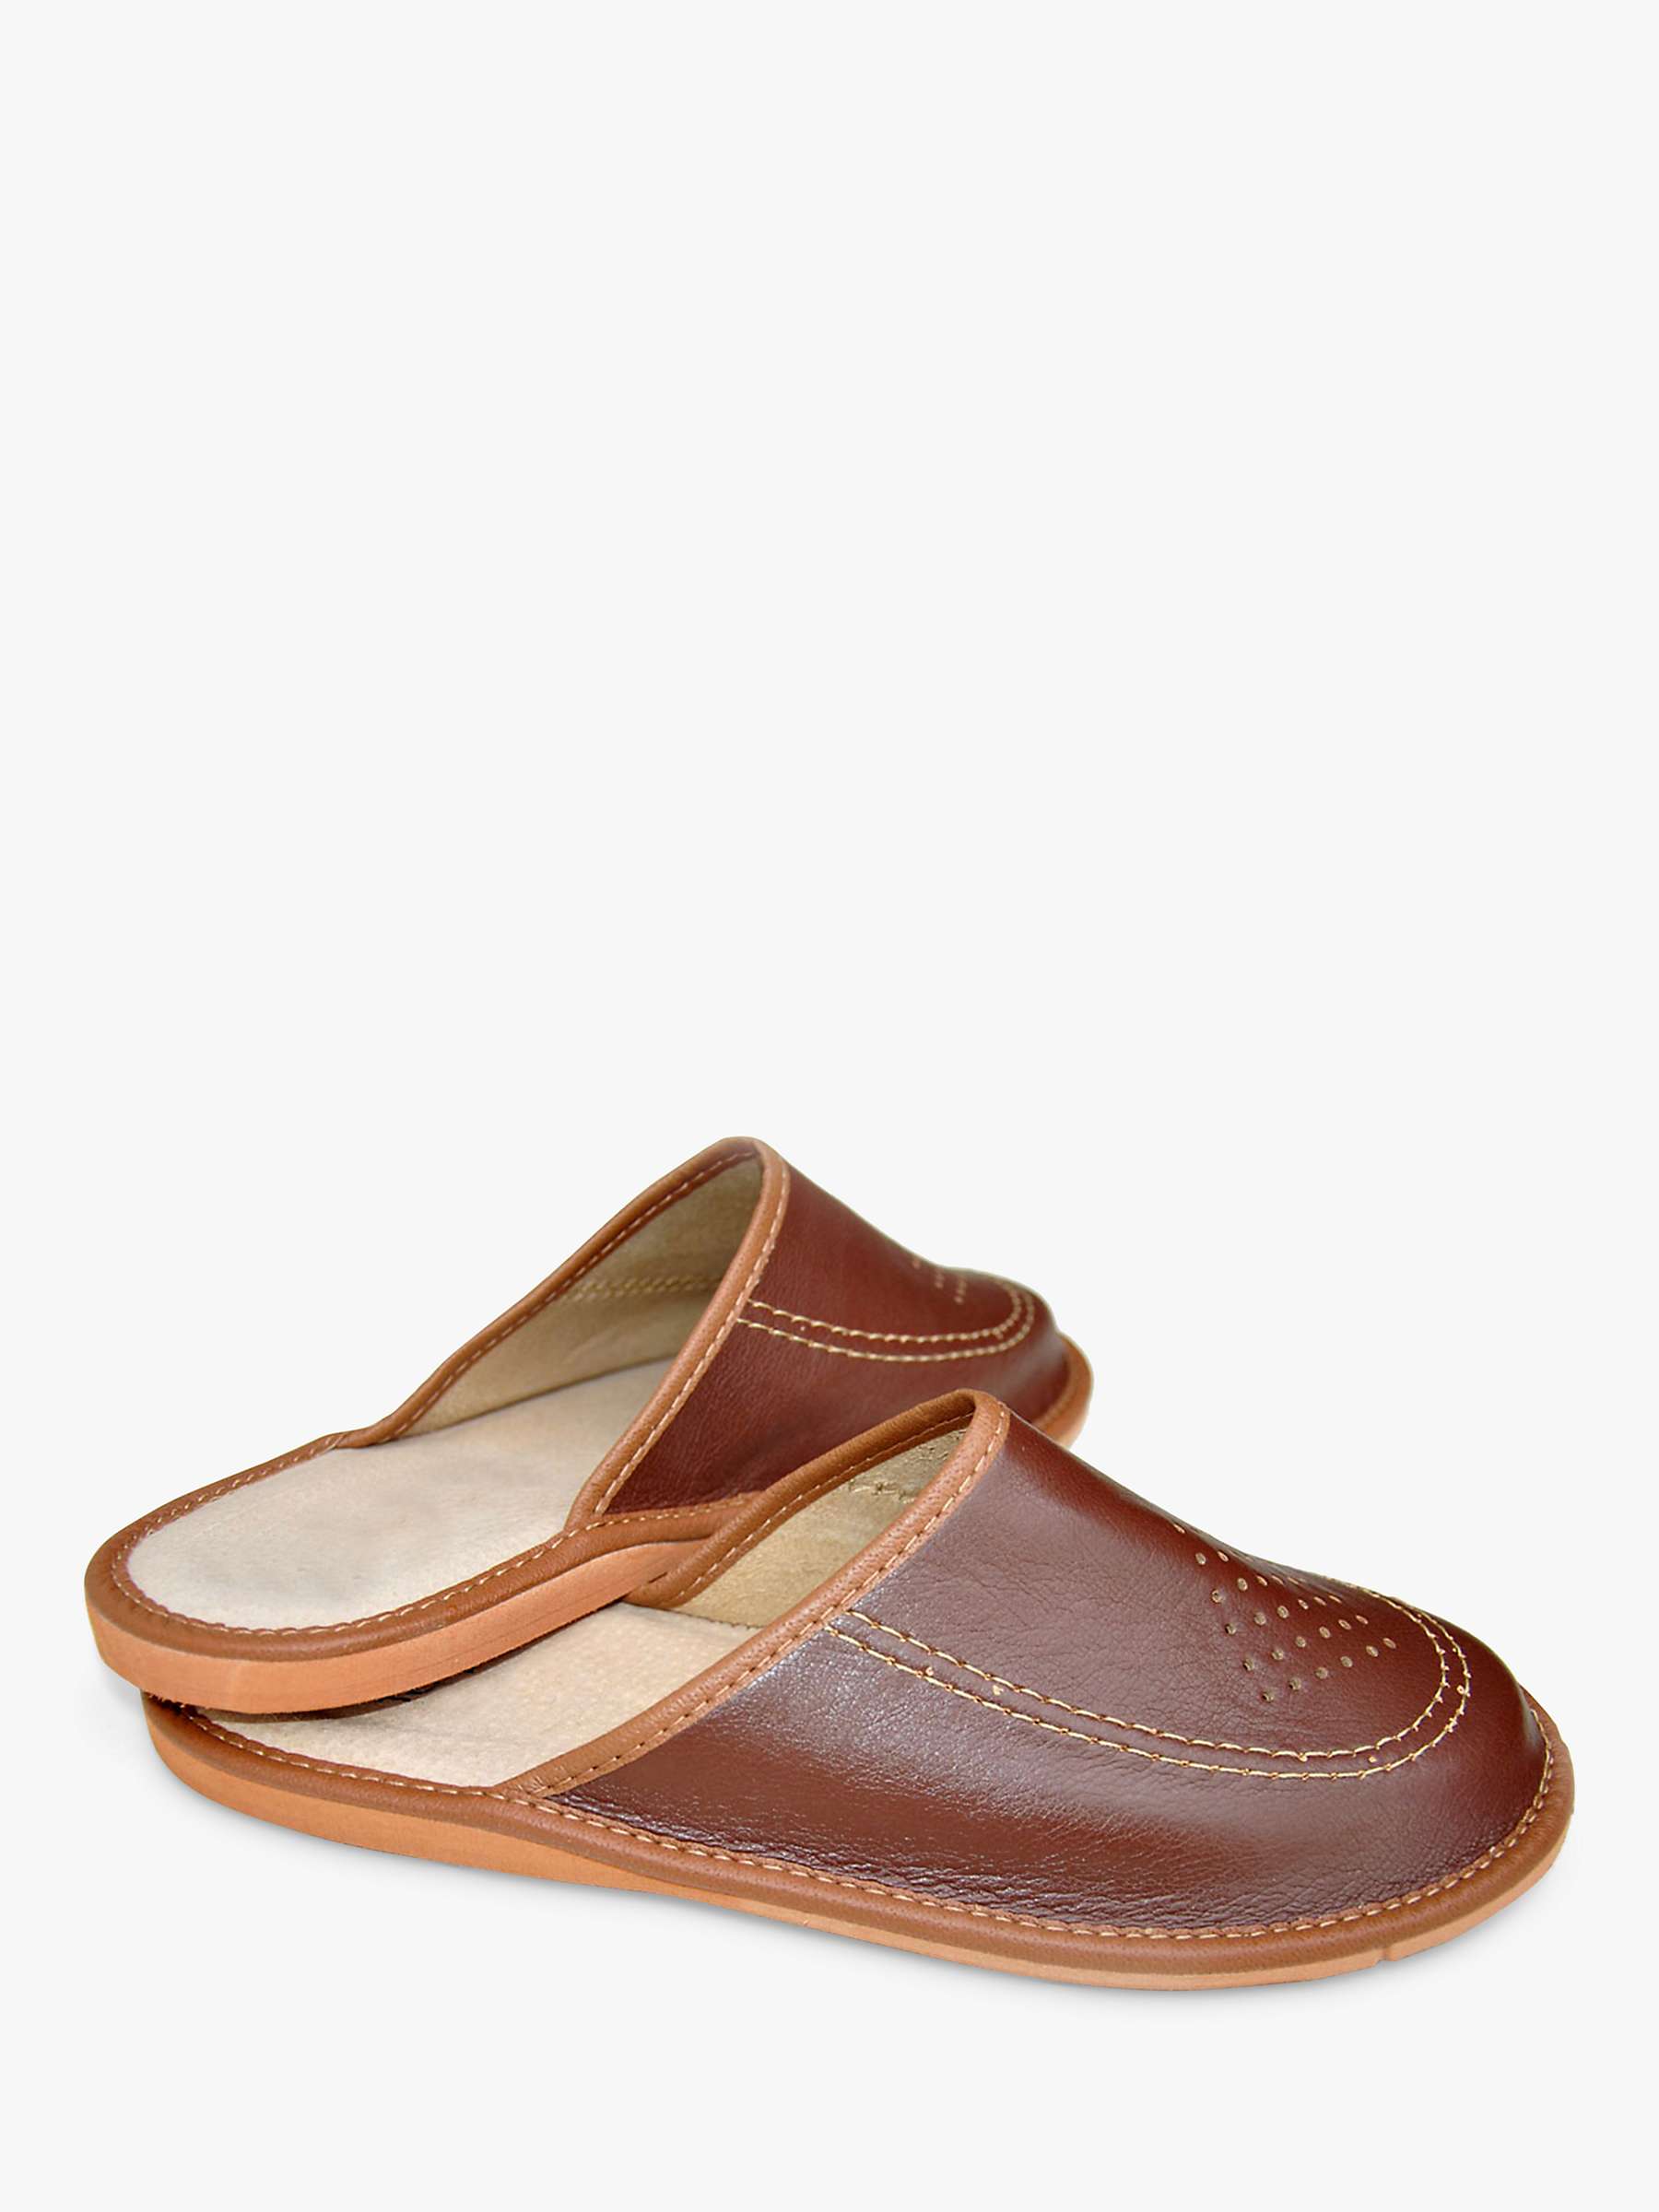 Buy HotSquash Lightweight Leather Mule Slippers Online at johnlewis.com